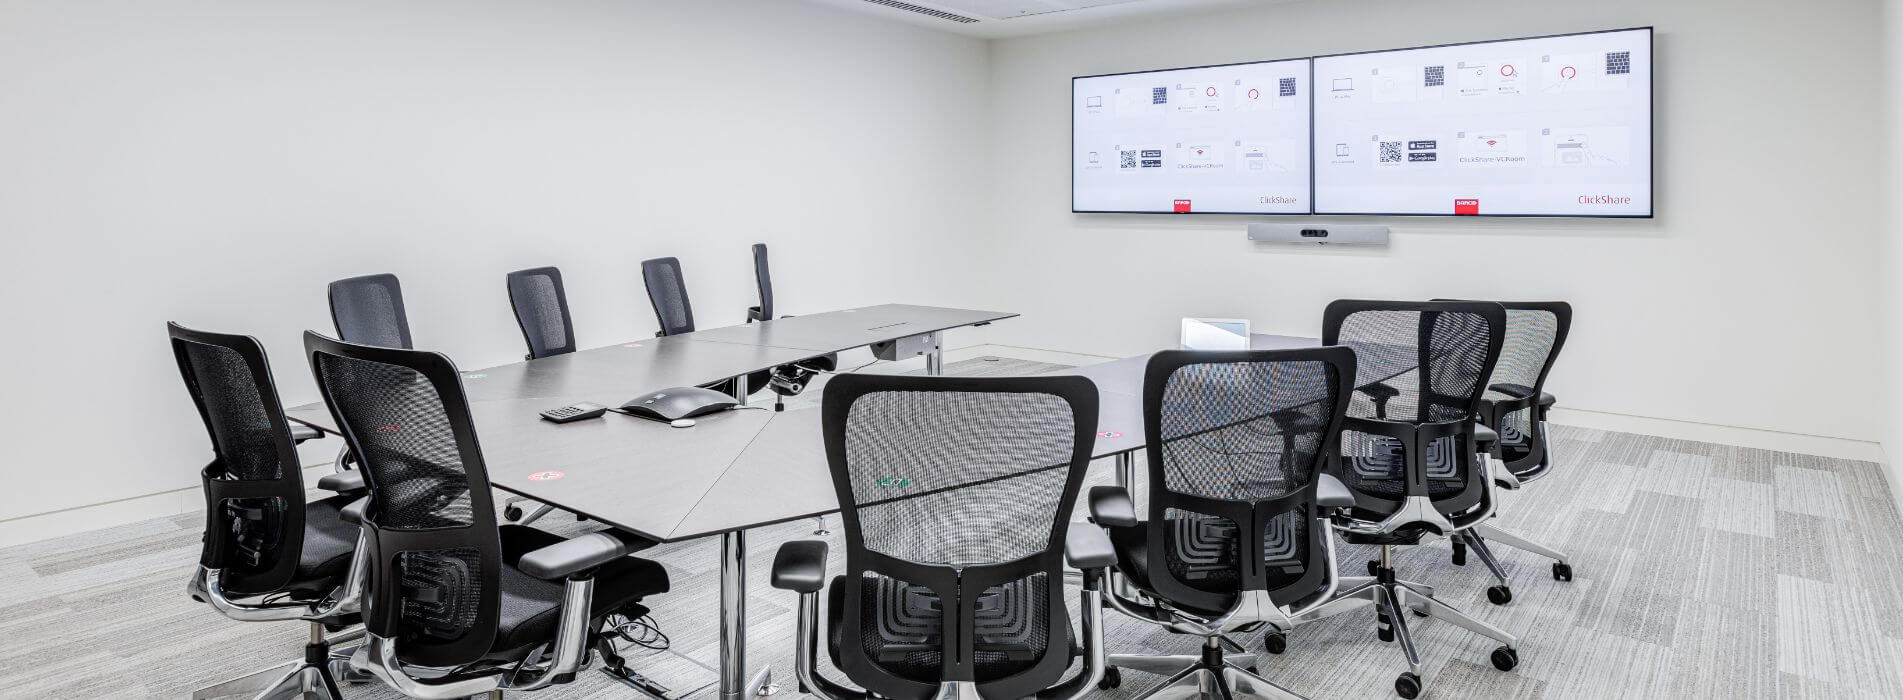 Audio Visual Solutions - Video Conference Suite